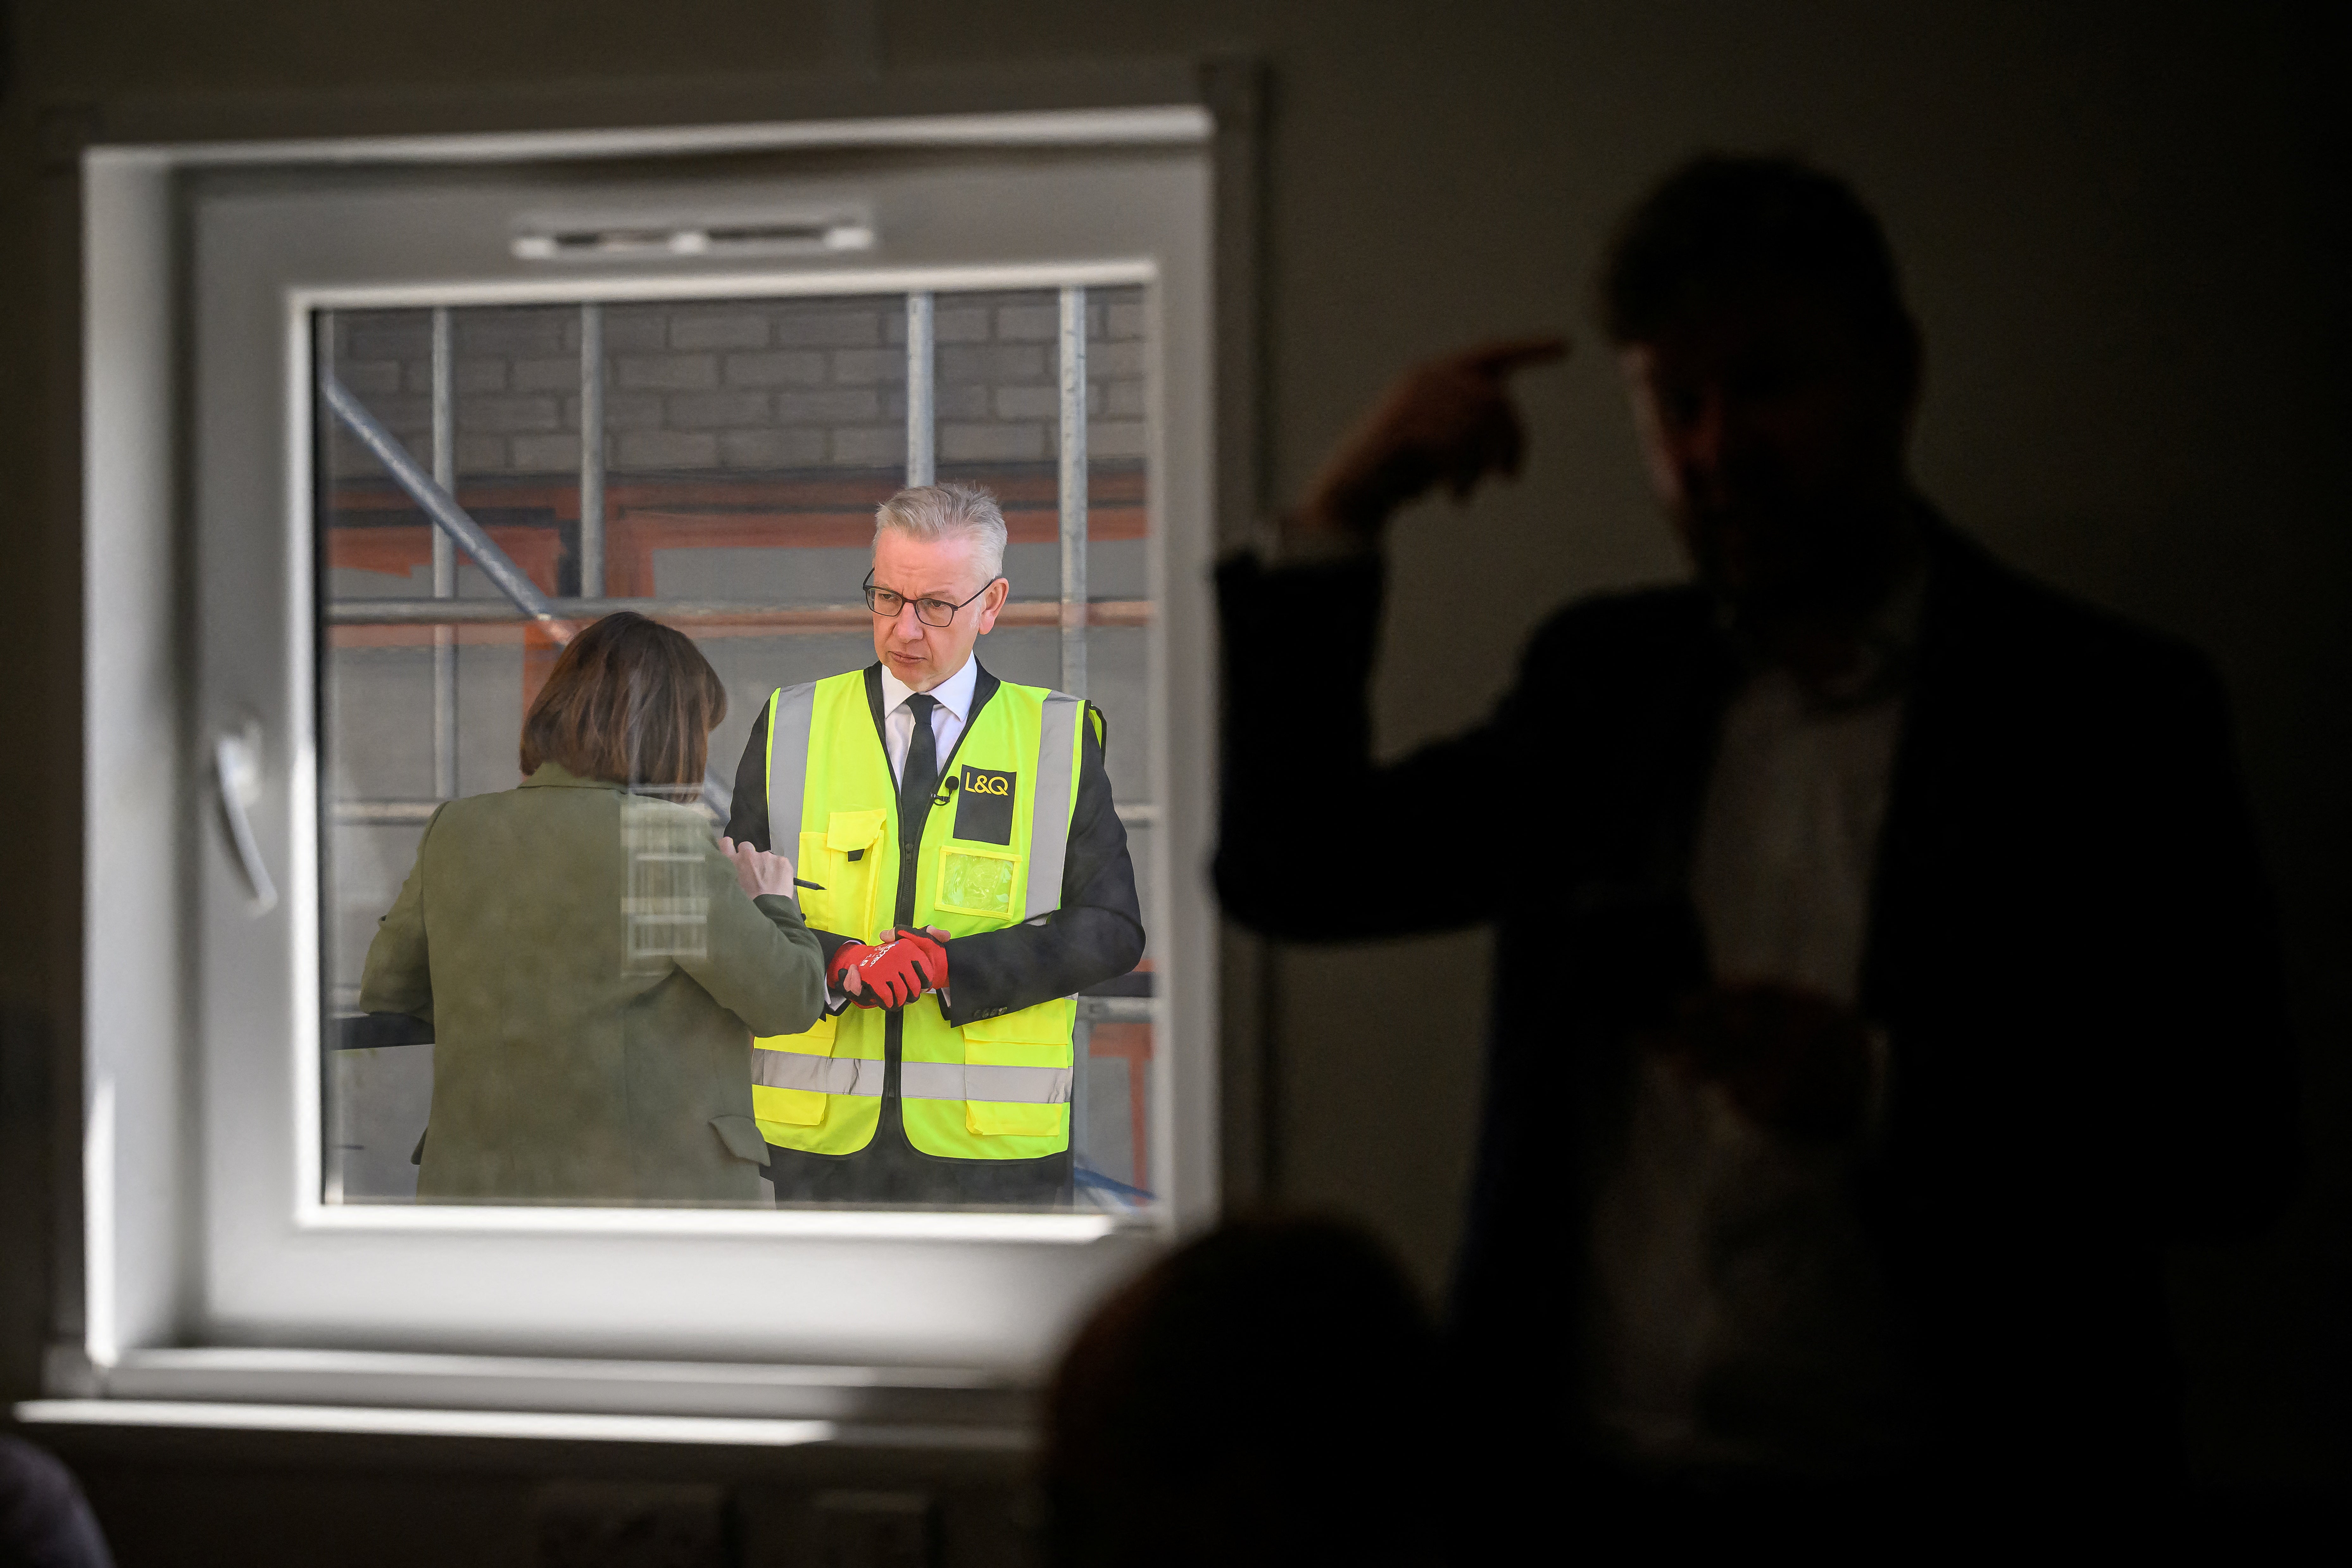 Beth Rigby catches up with Gove during the housing site visit